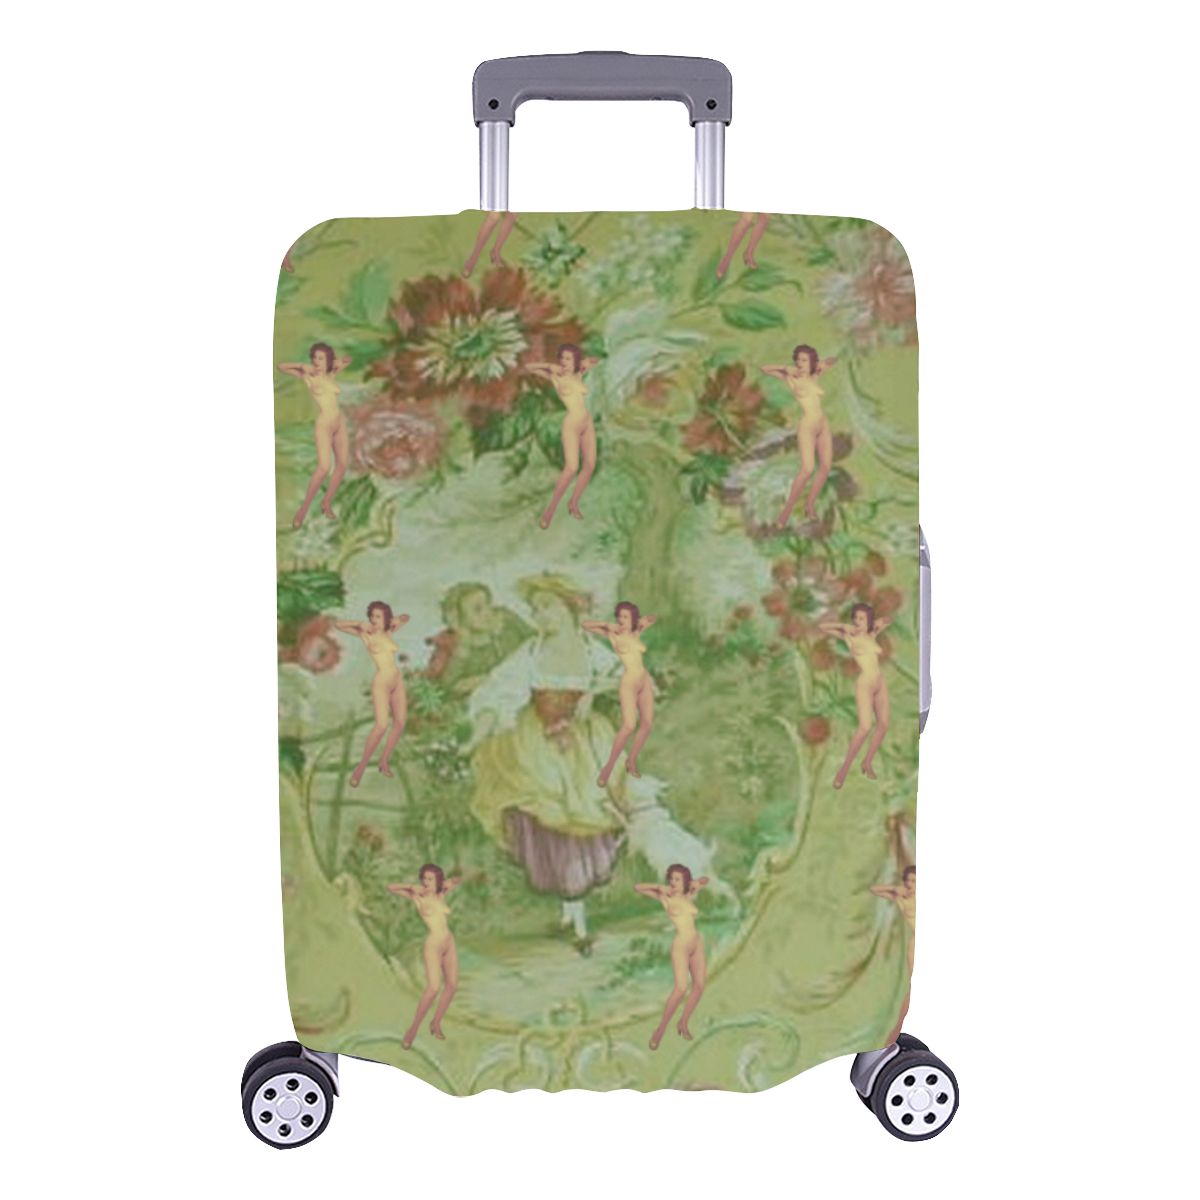 The Great Outdoors 2 Luggage Cover/Large 26"-28"